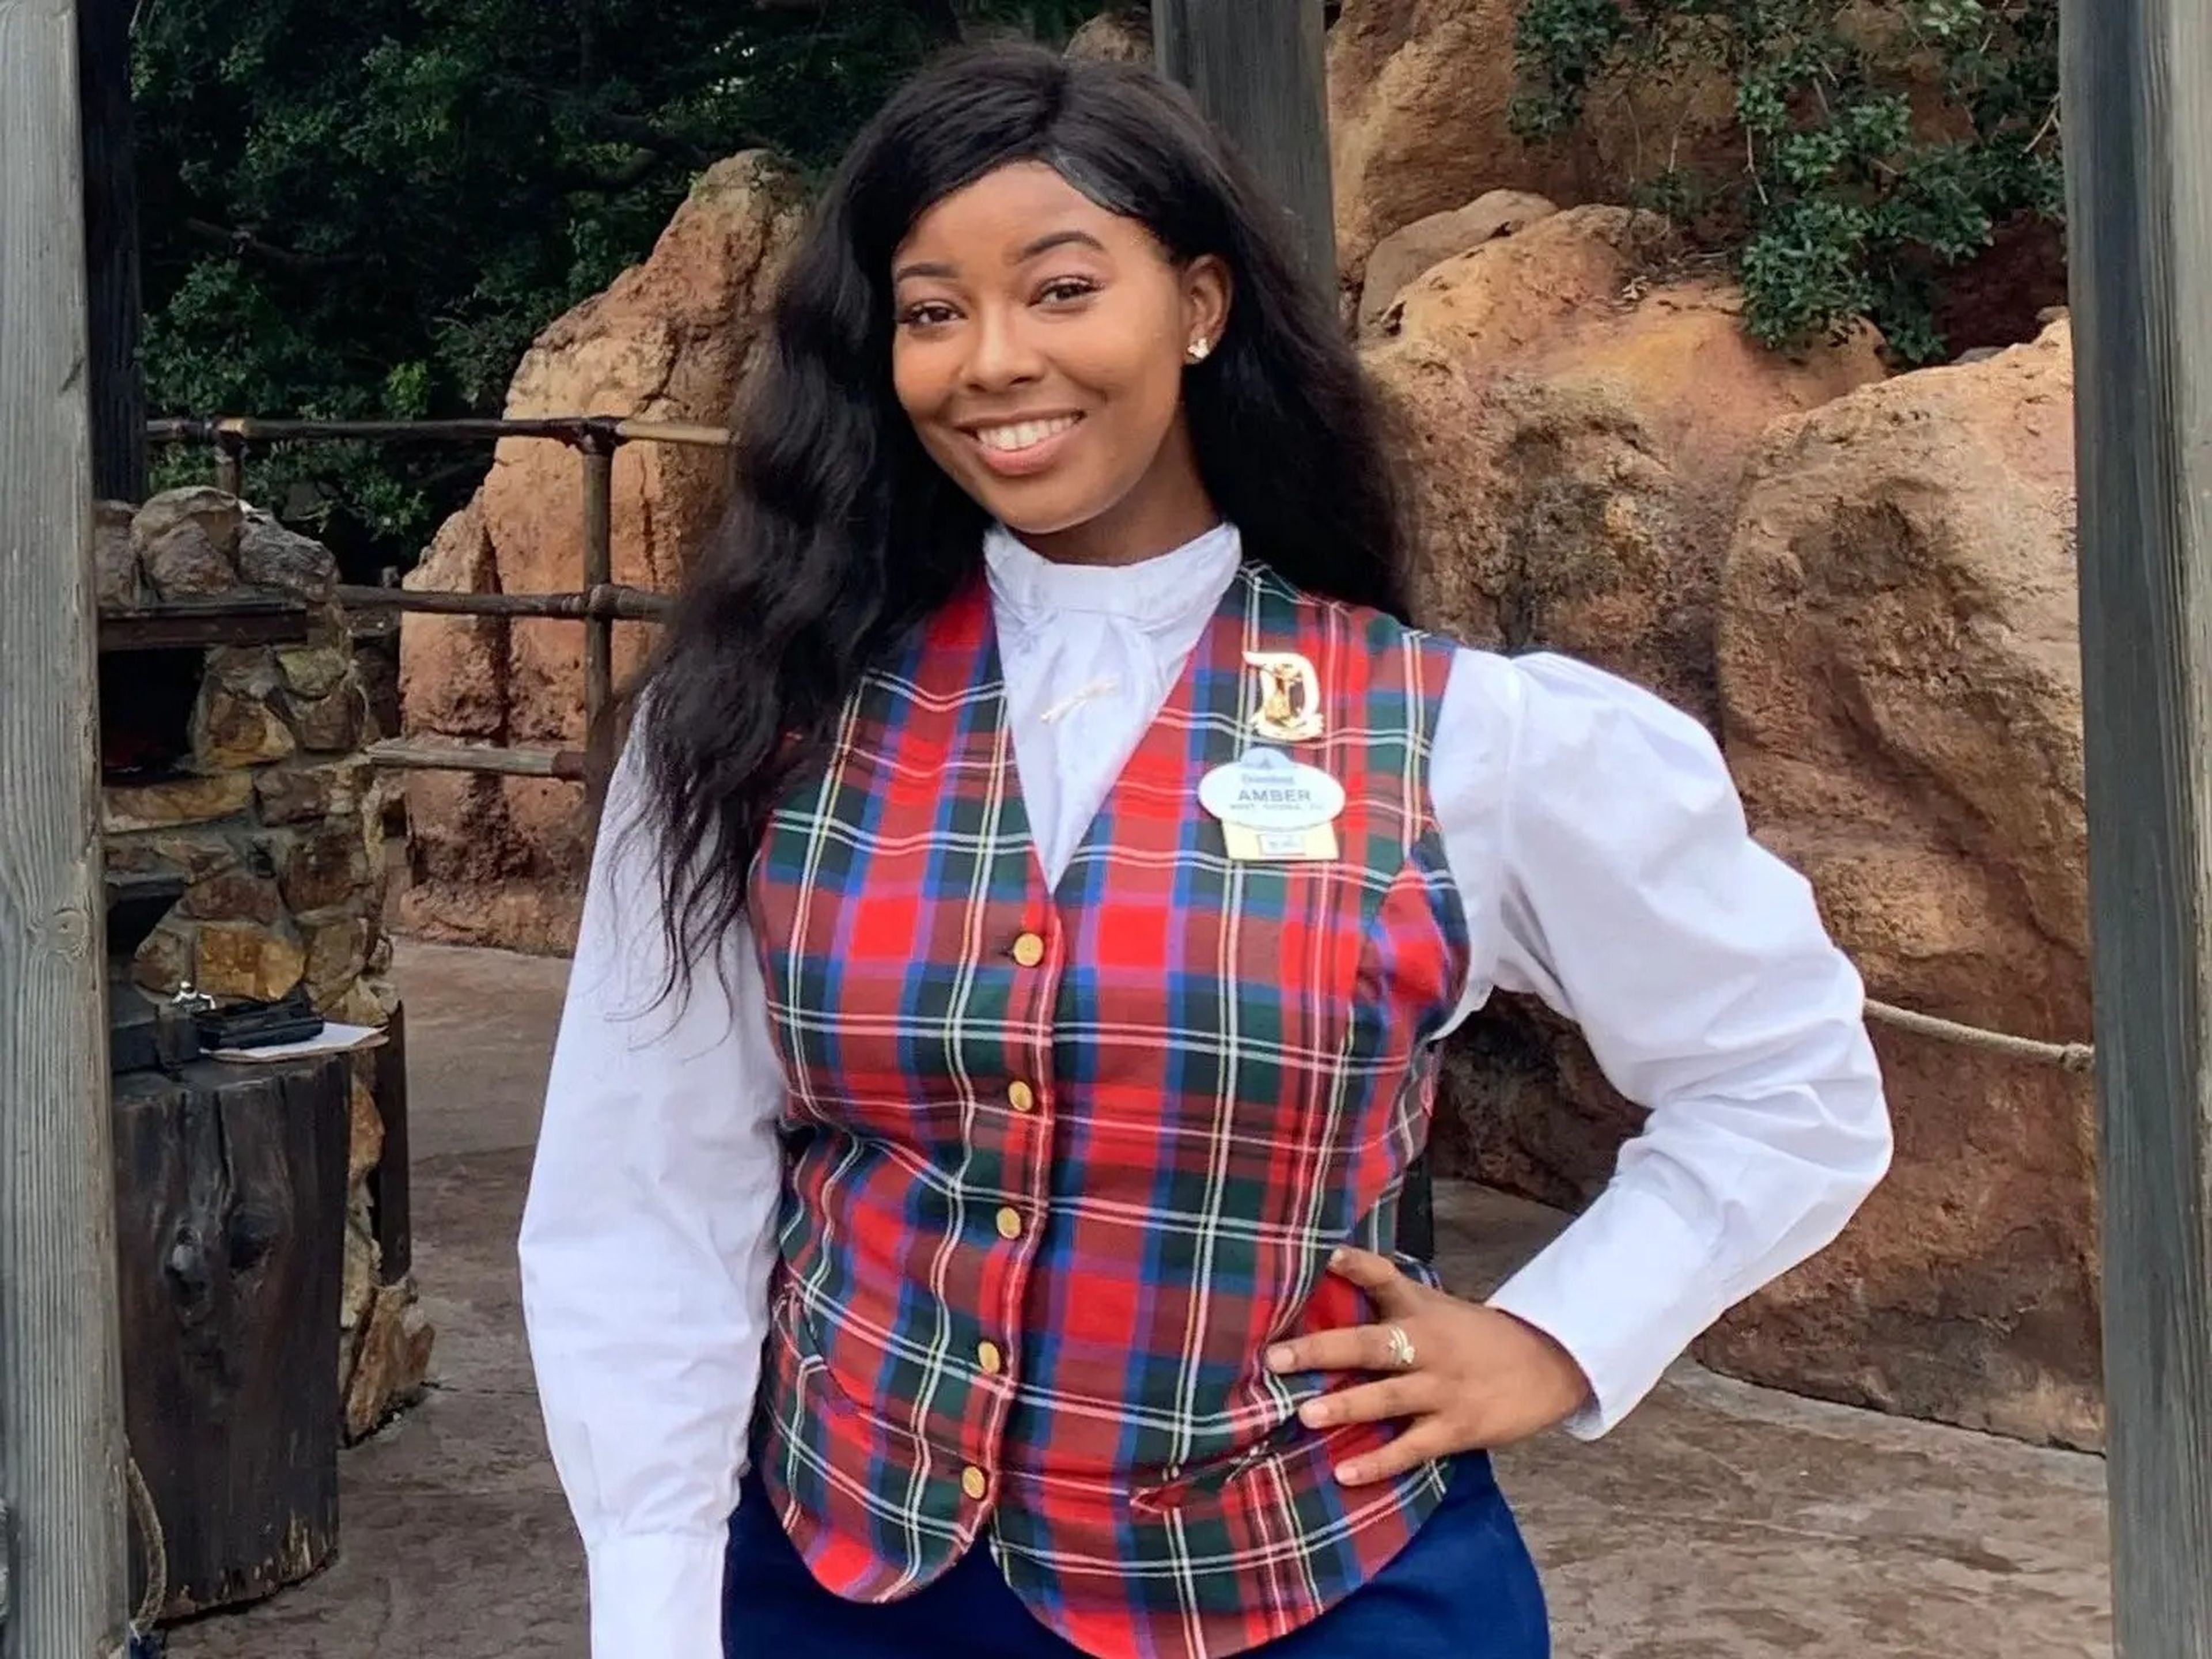 The writer wears a VIP Disneyland tour guide uniform, which includes a red plaid vest, a white shirt, and a blue skirt, and smiles